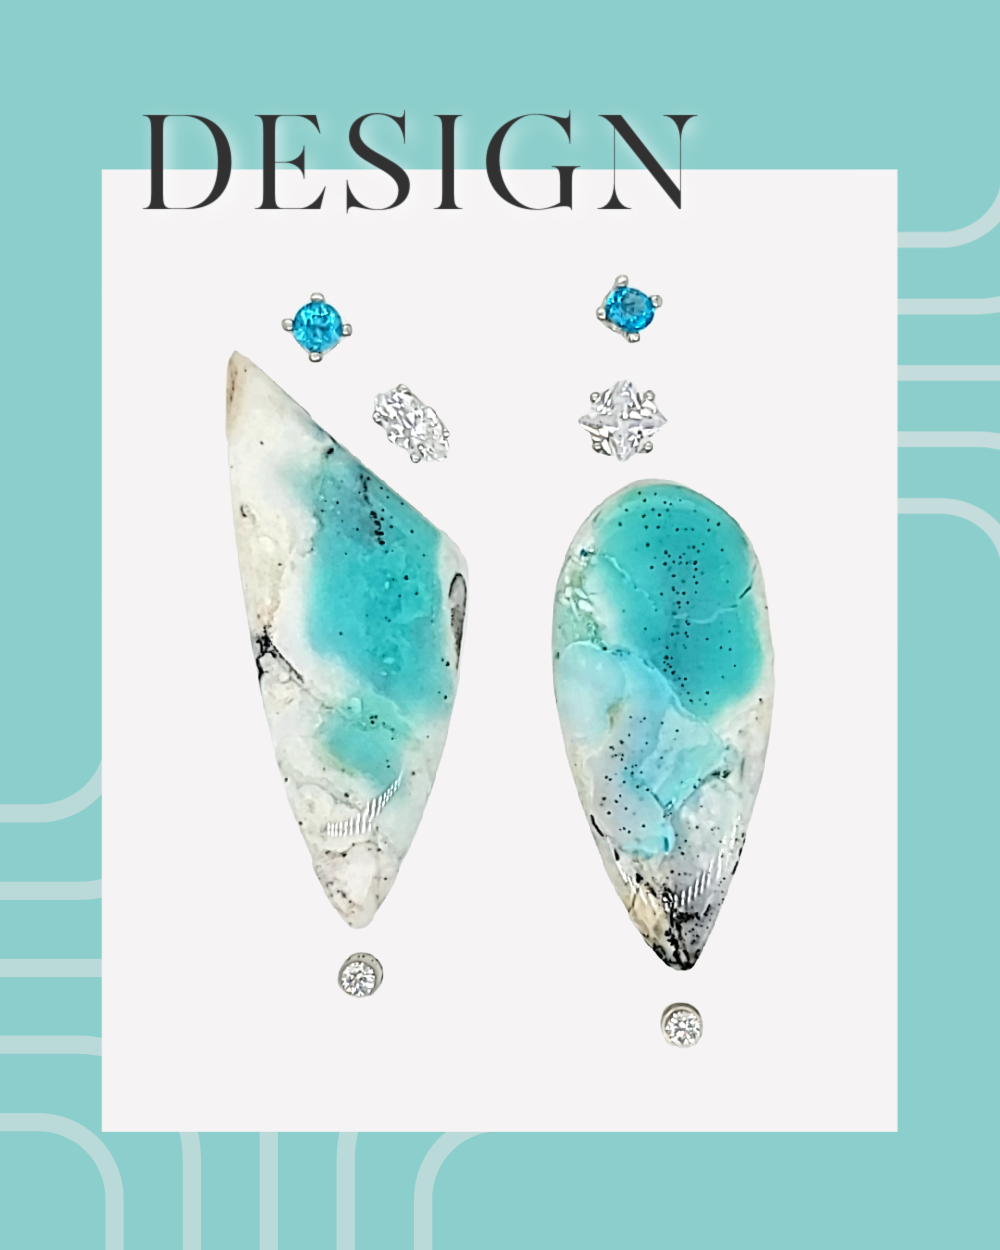 Design using stones featured in an email